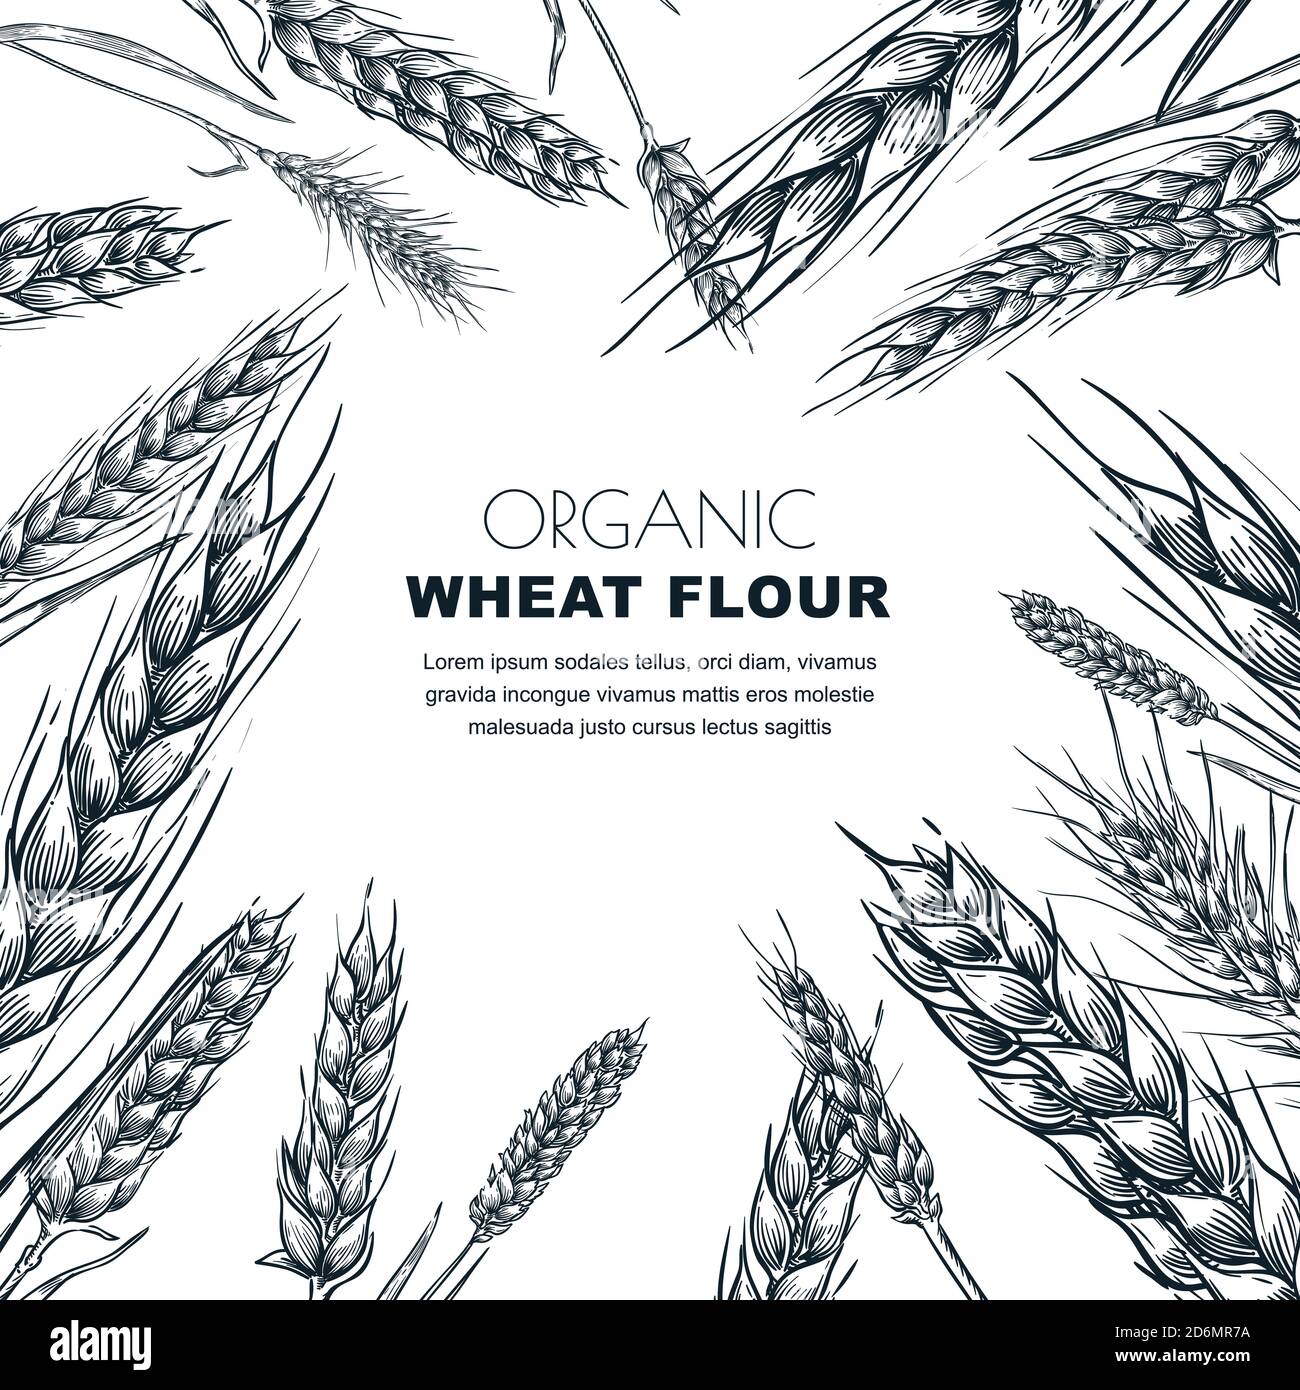 Wheat flour label design template. Sketch vector illustration of cereal ears. Bakery package background. Stock Vector